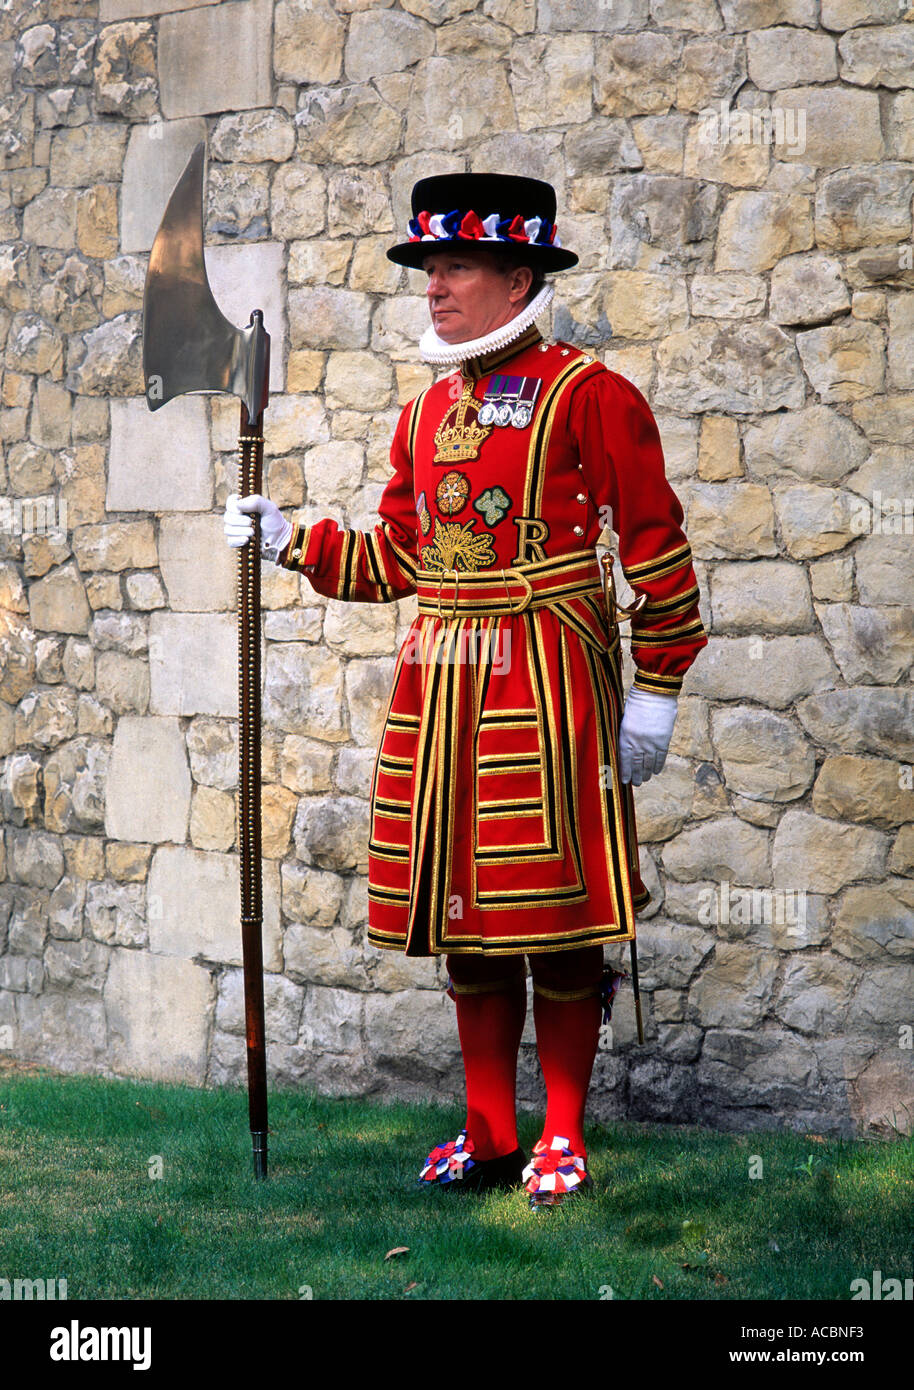 Beefeater Tower of London England UK Yeoman Warder Costume Heritage ...